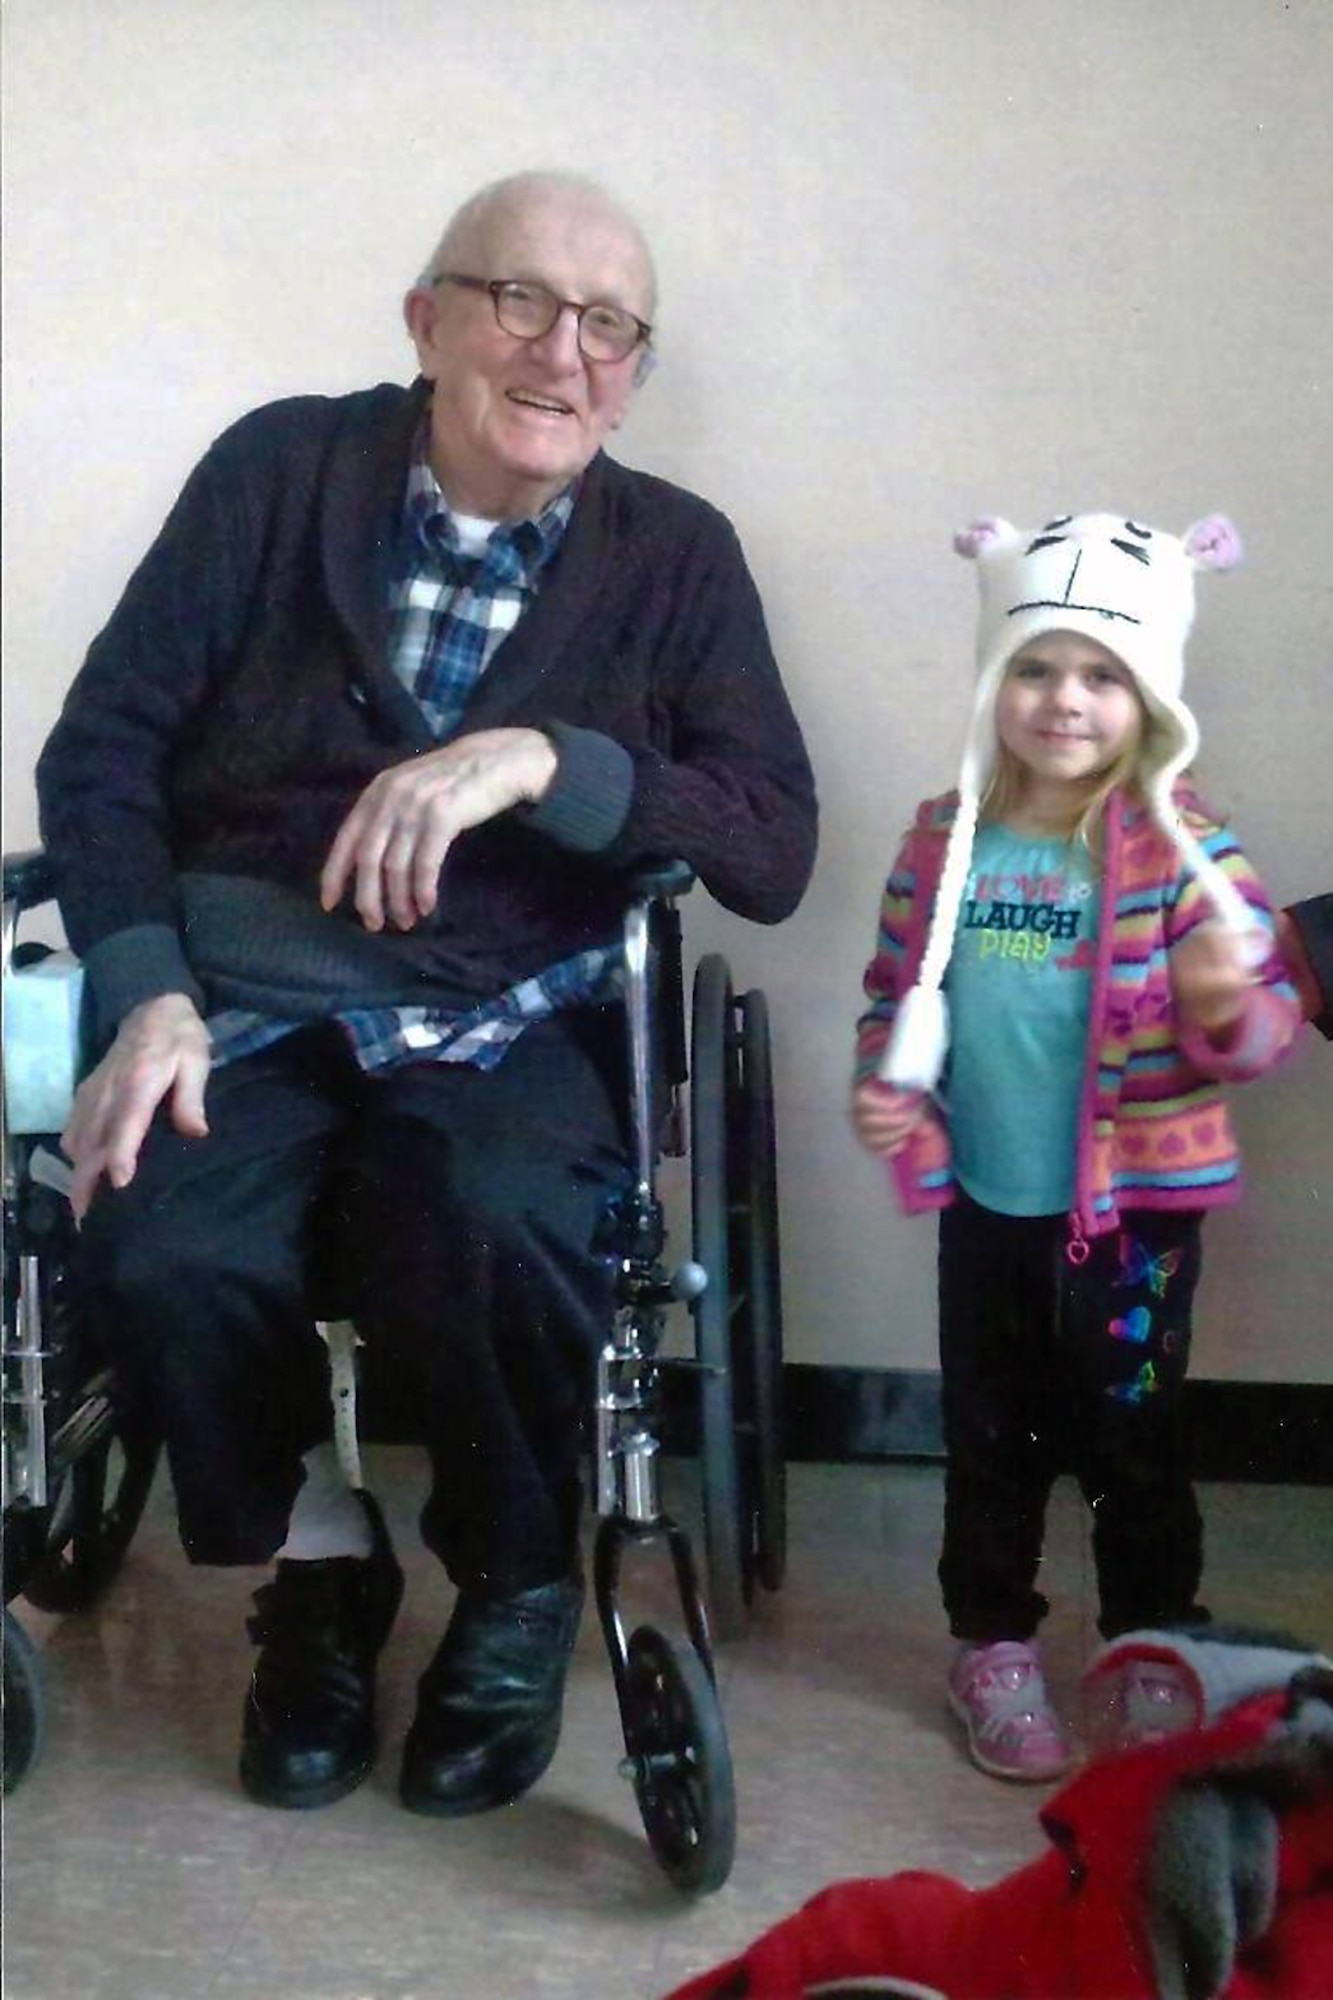 HOLYOKE, Mass. –Retired Tech. Sgt. Emil Dihlmann poses for a picture with his great granddaughter at the Soldier’s Home in Holyoke, Mass., in early 2013. Dihlmann served at RAF Alconbury from 1943 to 1945 and he had such fond memories of his time there that his family asked if they could spread his ashes on the base after he passed away June 27 at the age of 96. (Photo courtesy of Emily Lewney)